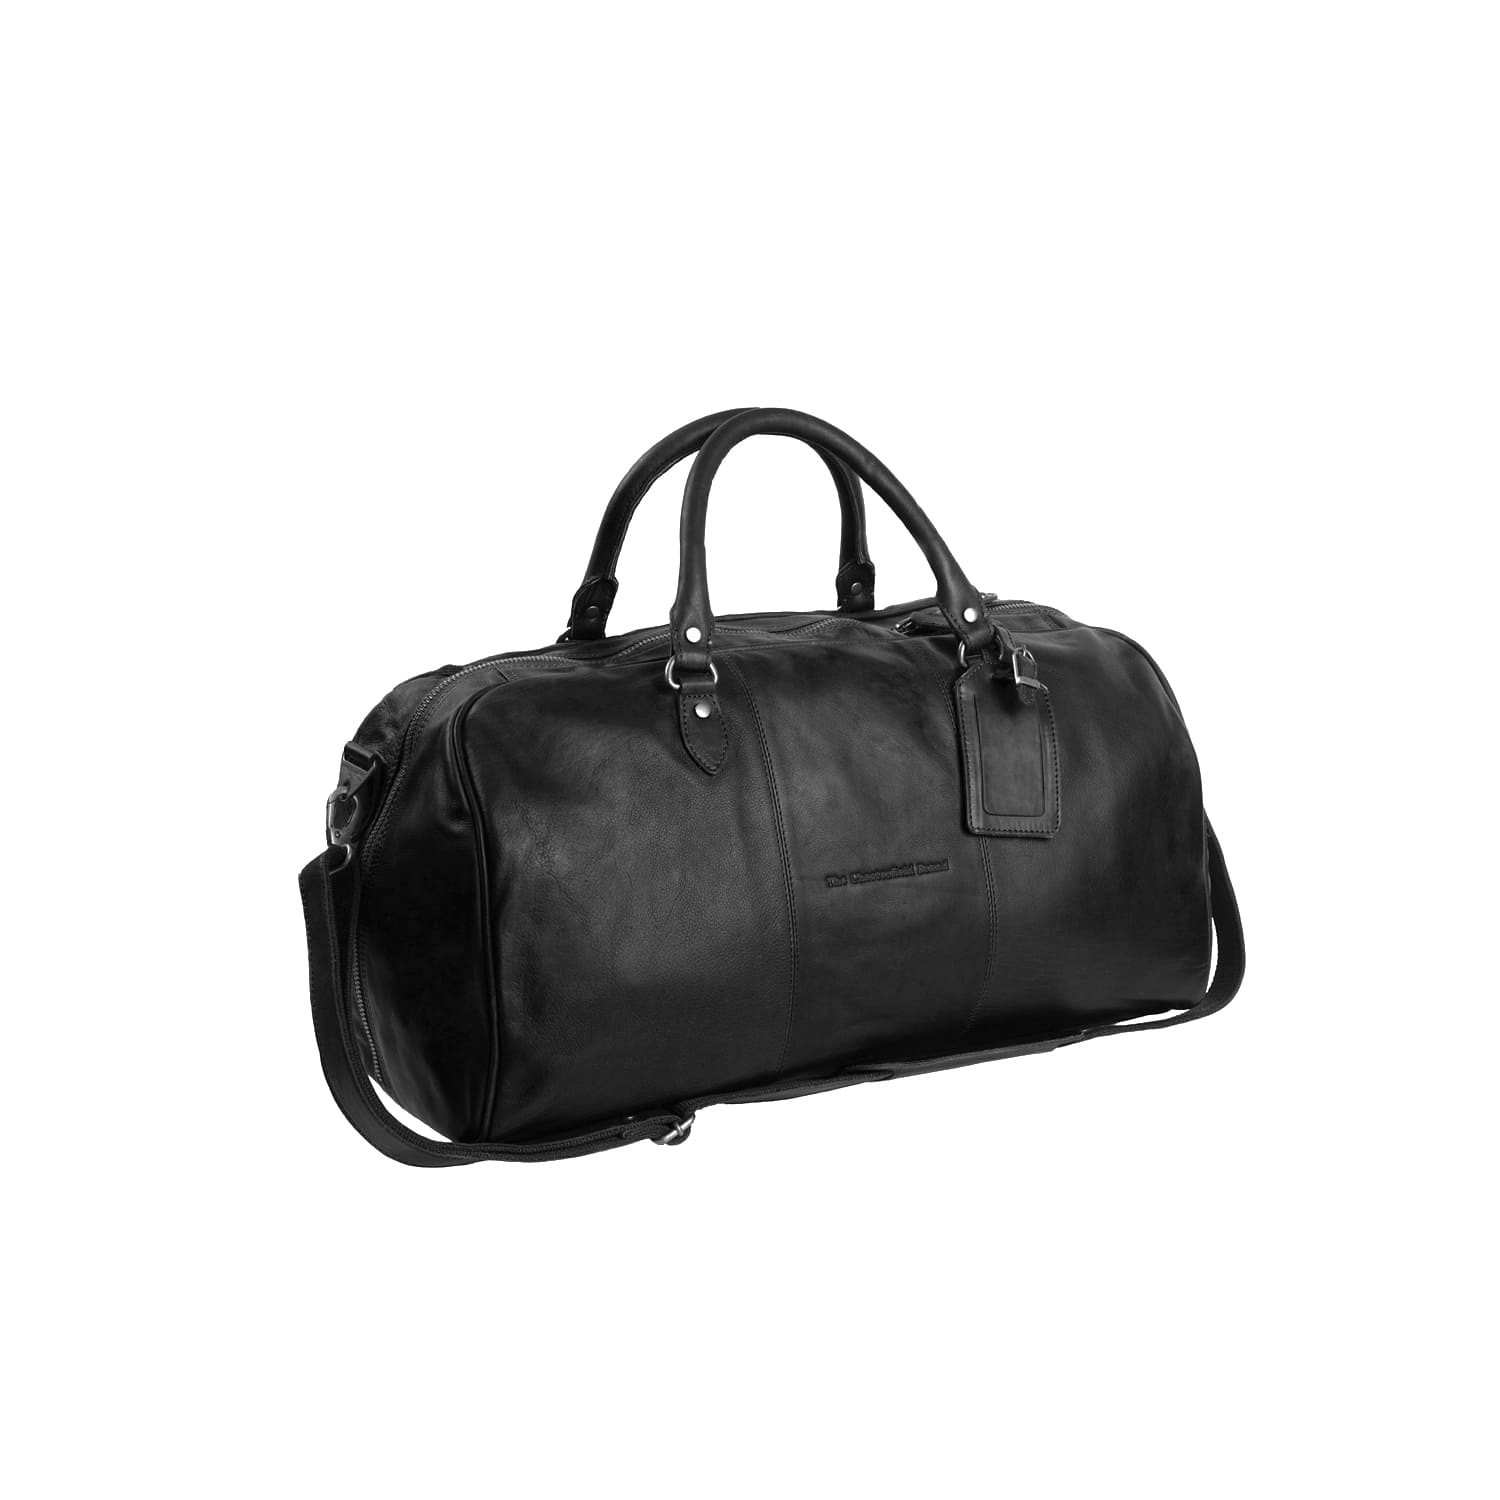 Leather Weekend Bag Black William - The Chesterfield Brand